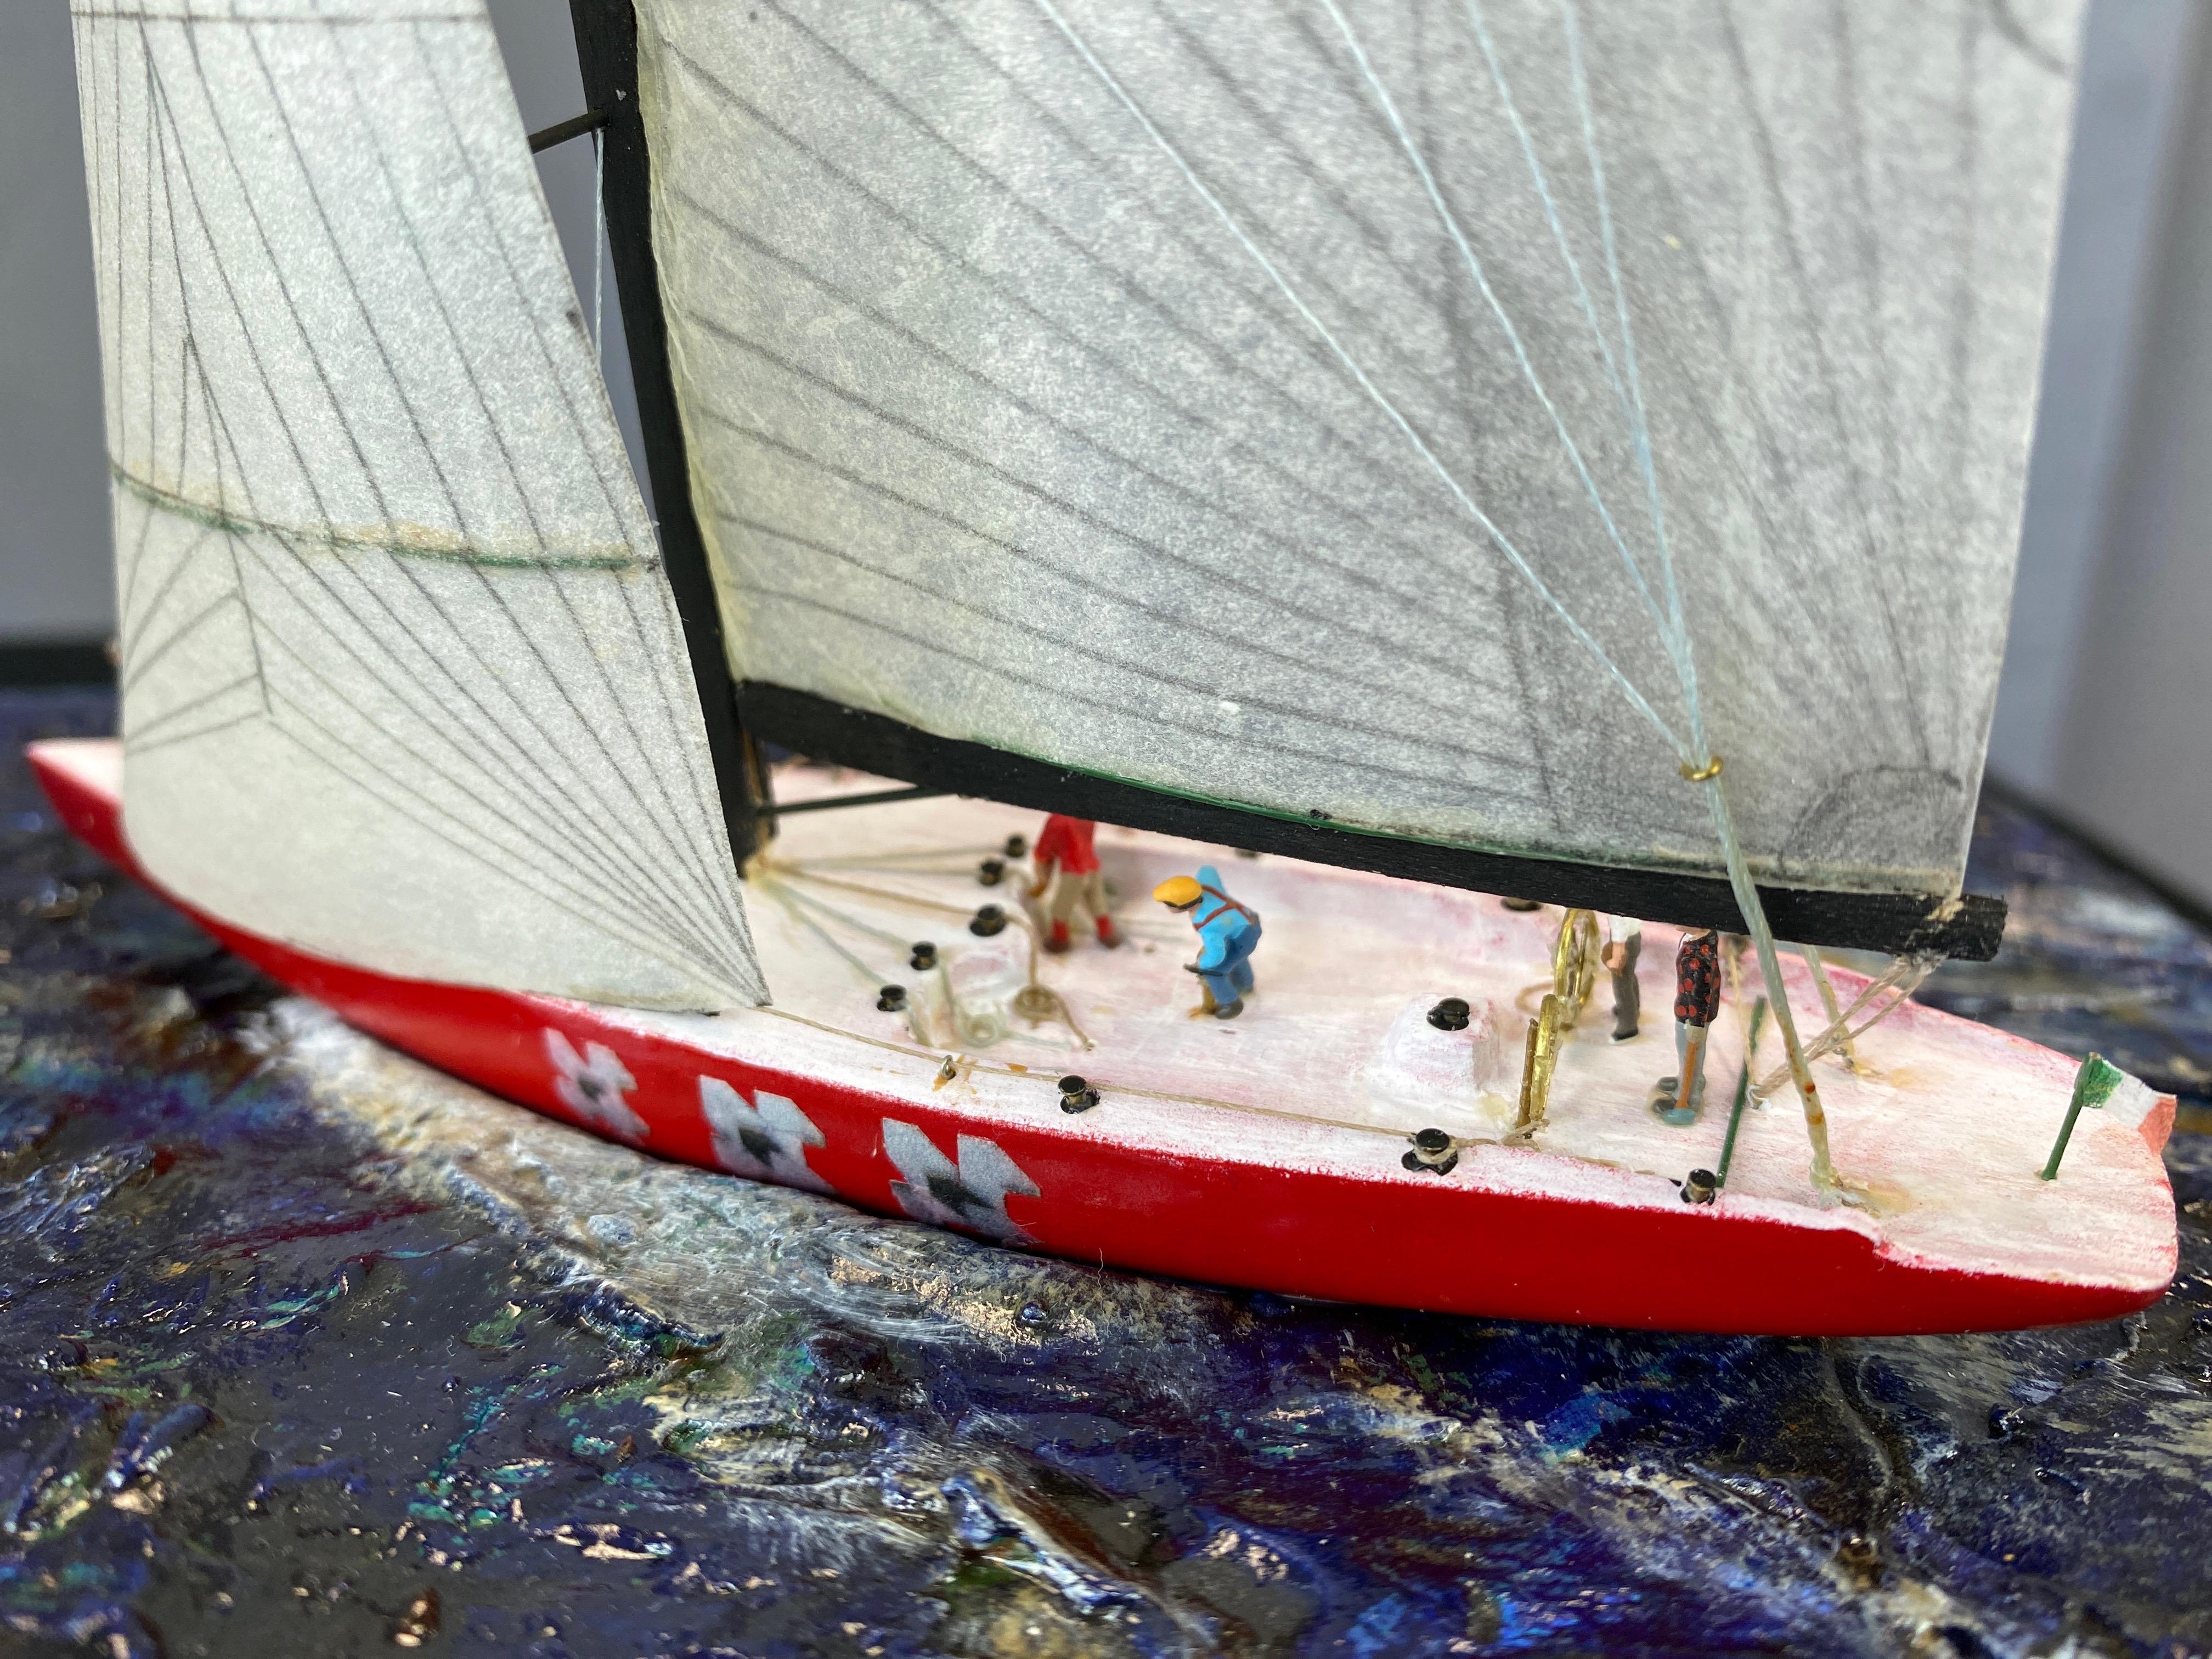 R. Royer 1992 28th America’s Cup Hand-Built Cased Diorama, 2009 10